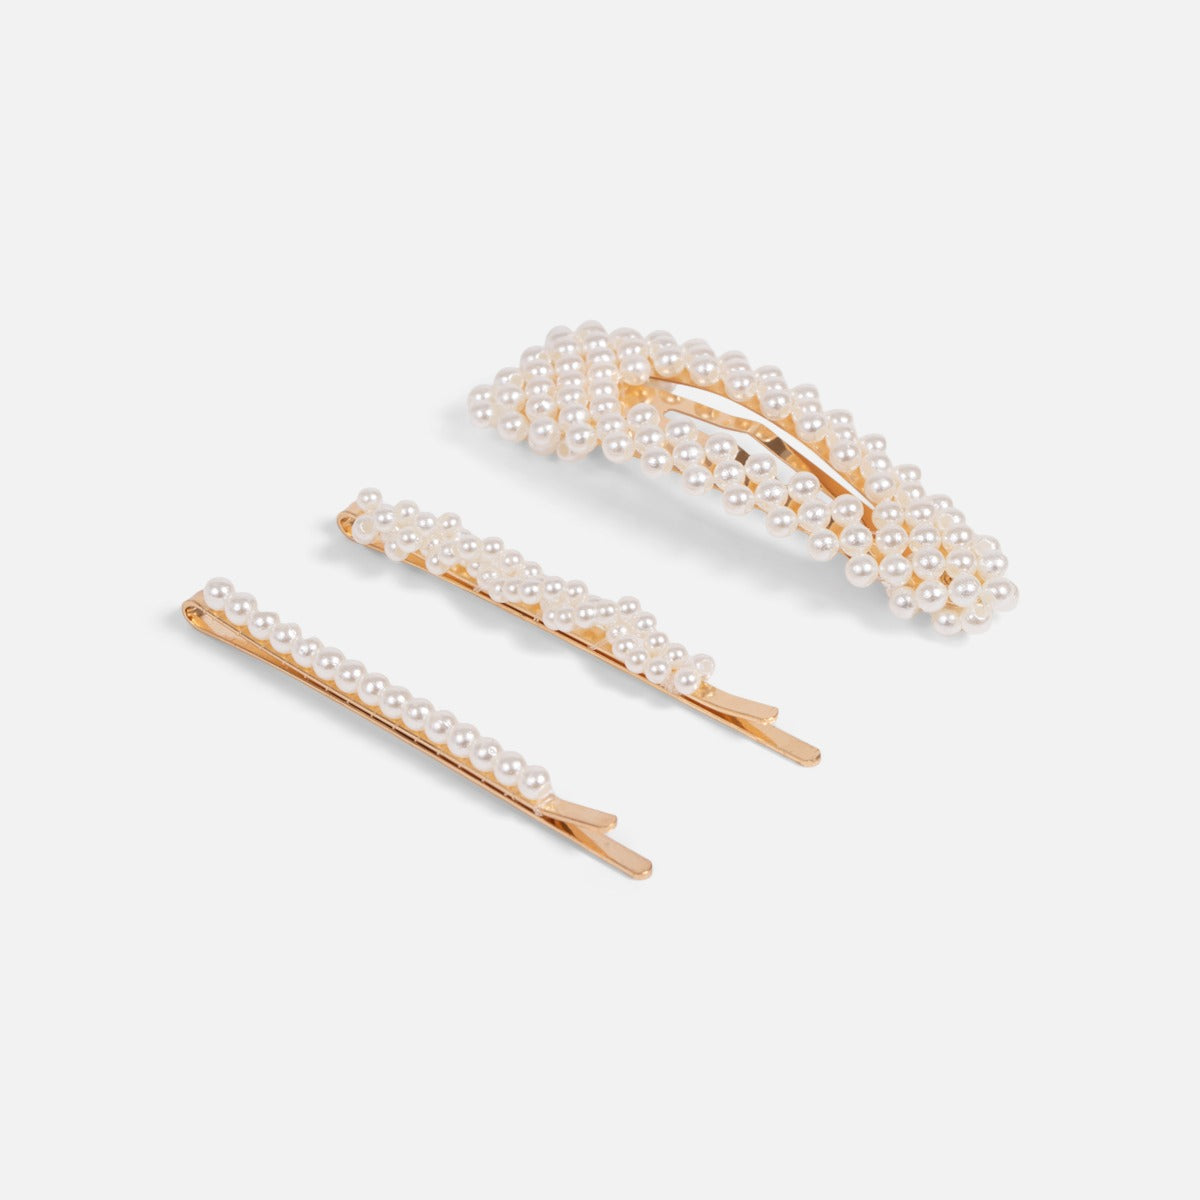 Set of three barrettes with pearls